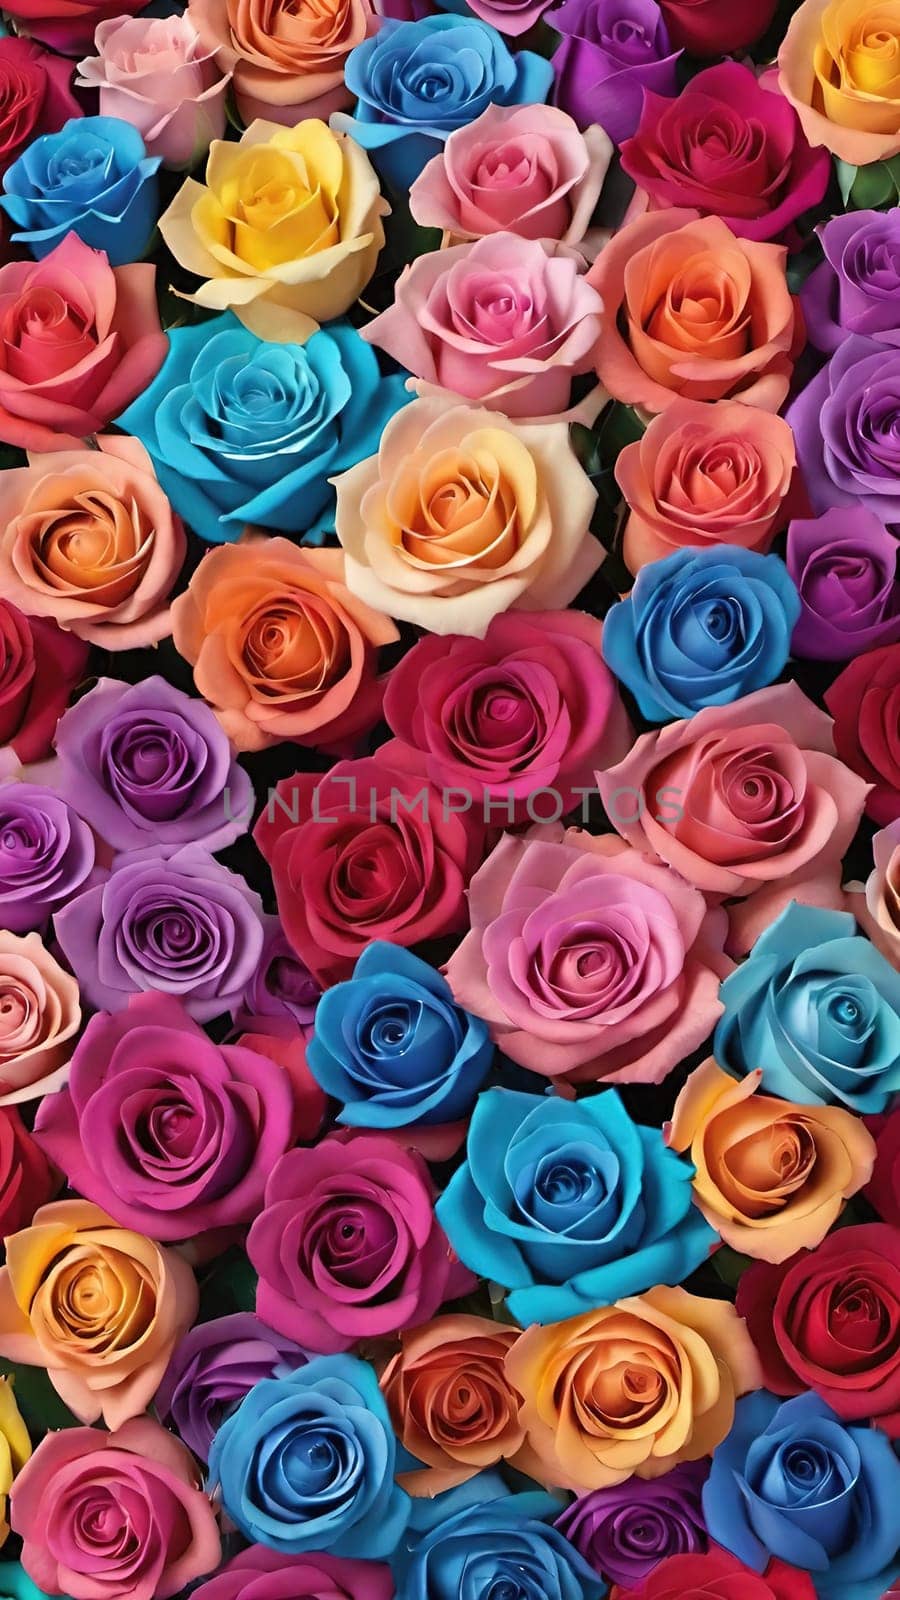 ulticolored roses as a background, top view, close up by yilmazsavaskandag